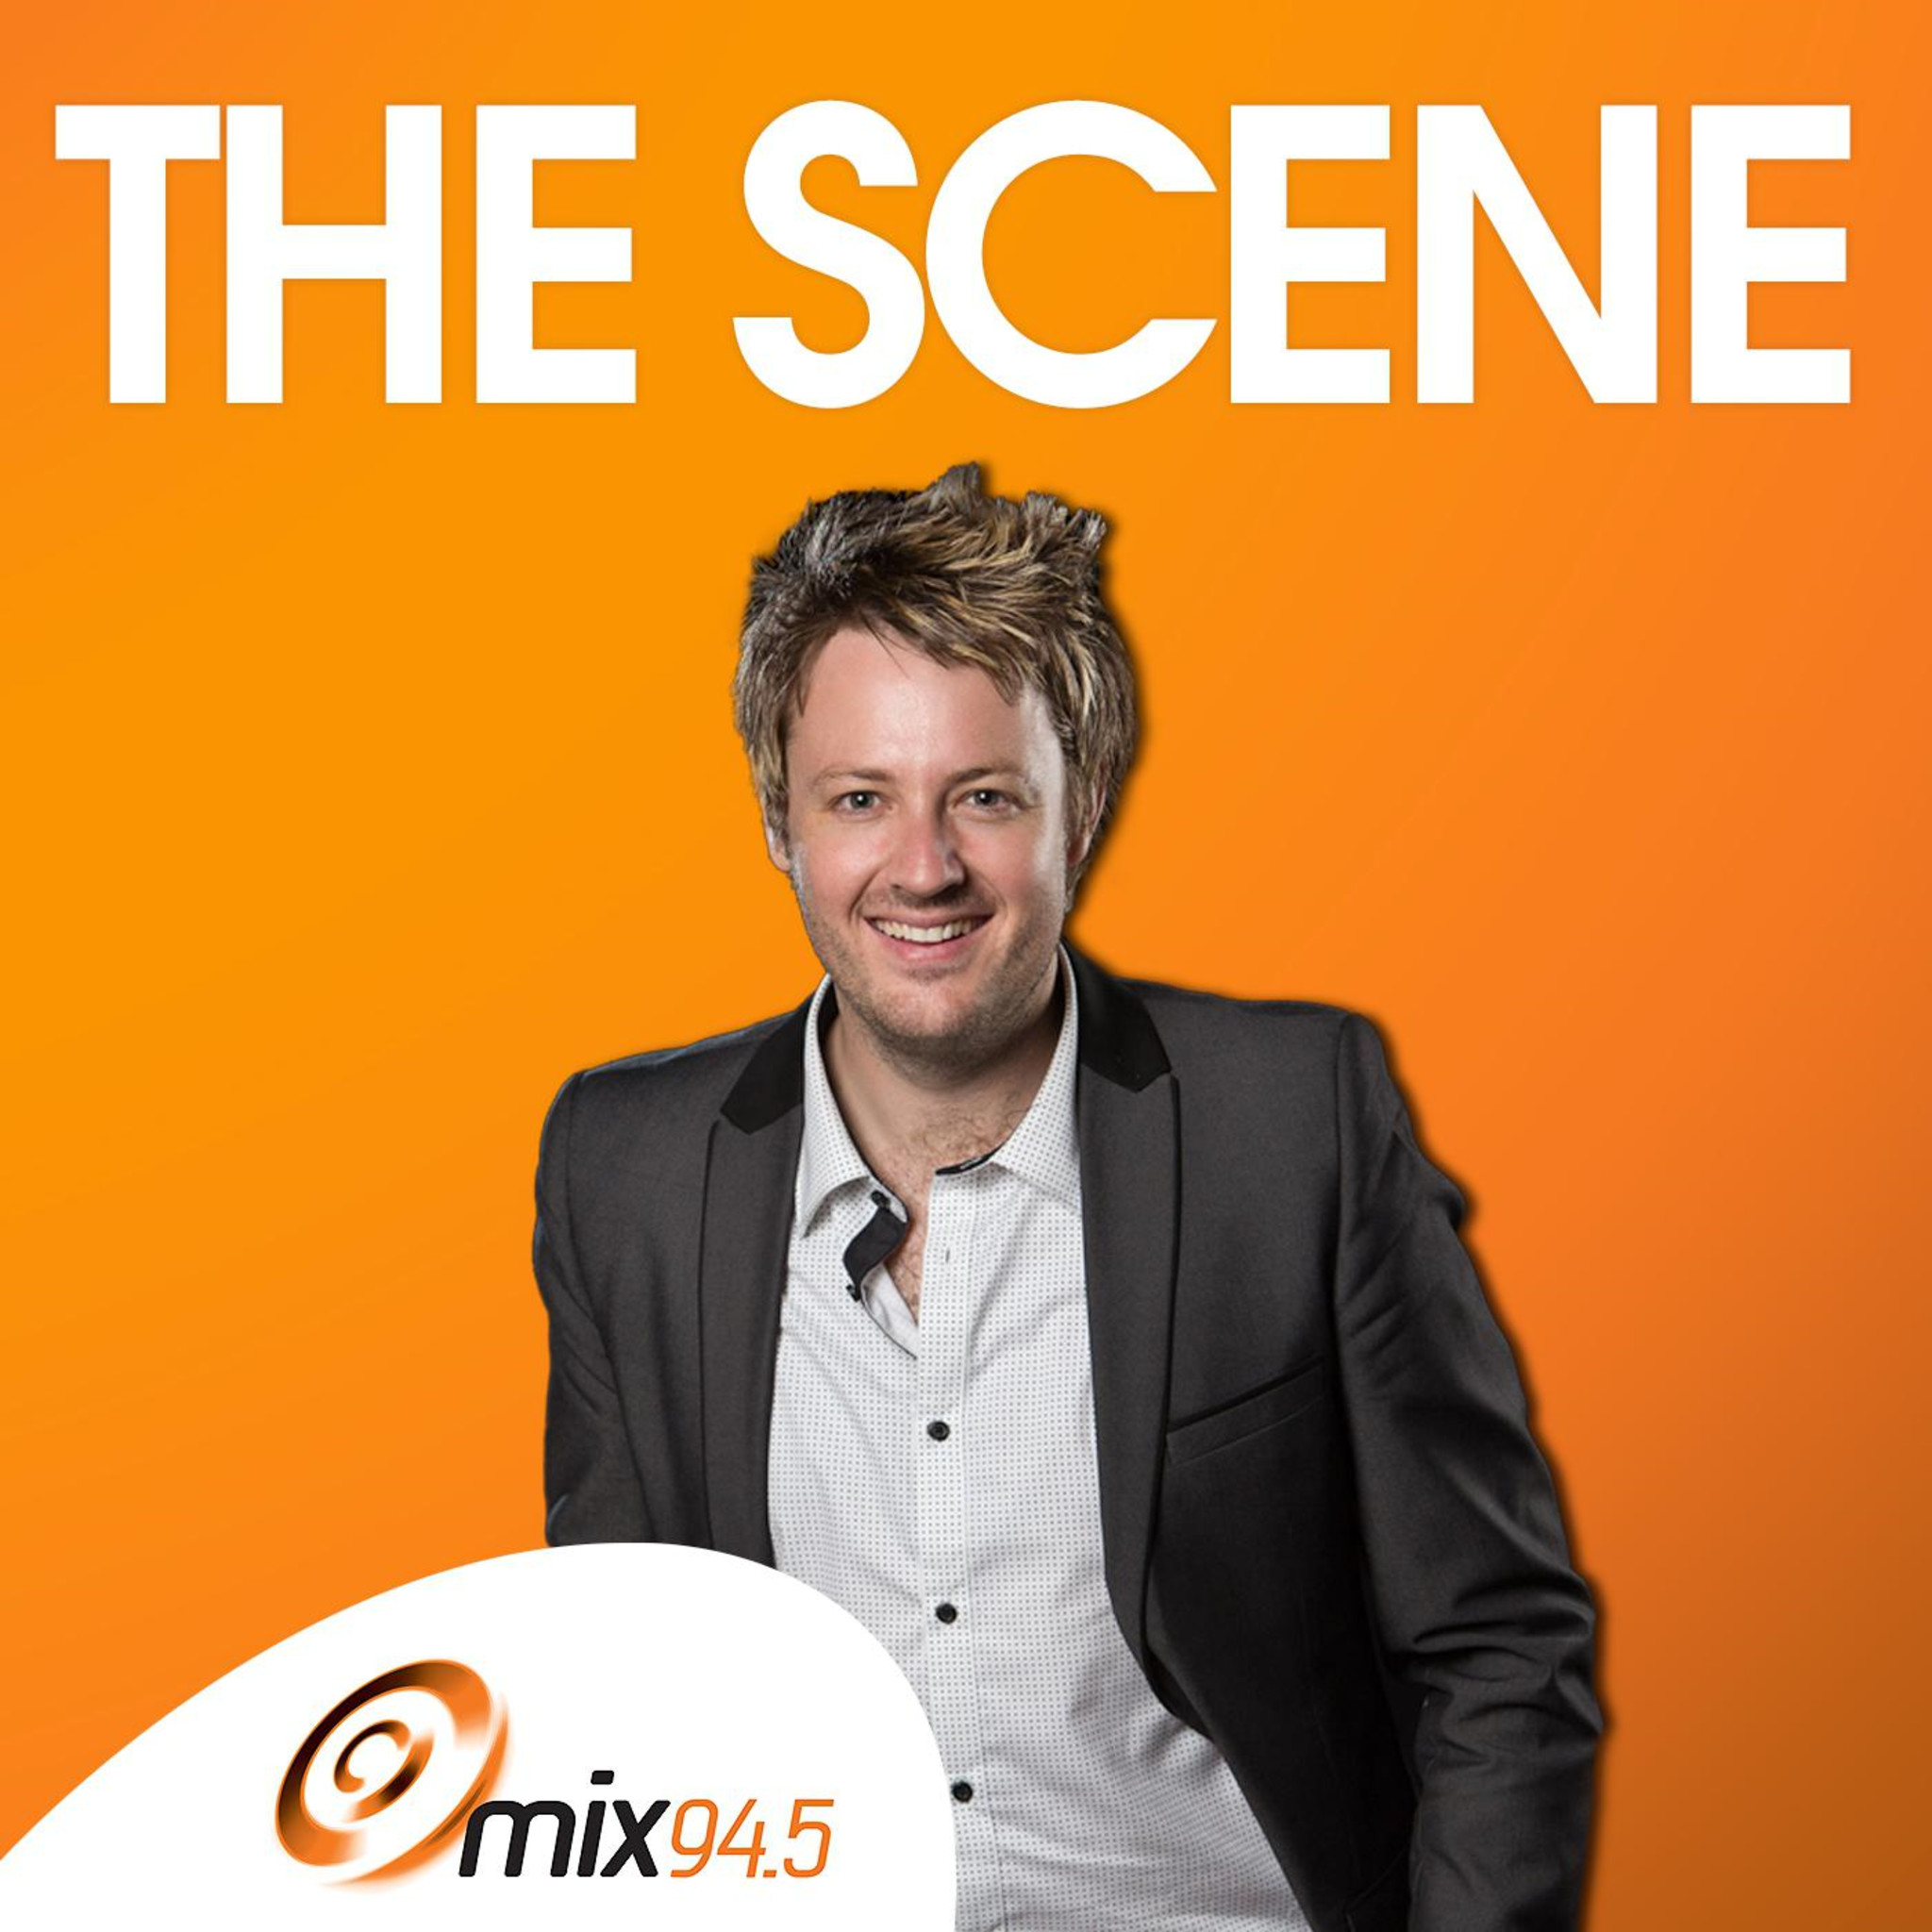 #thescene / Show 248 / Tom Fisher